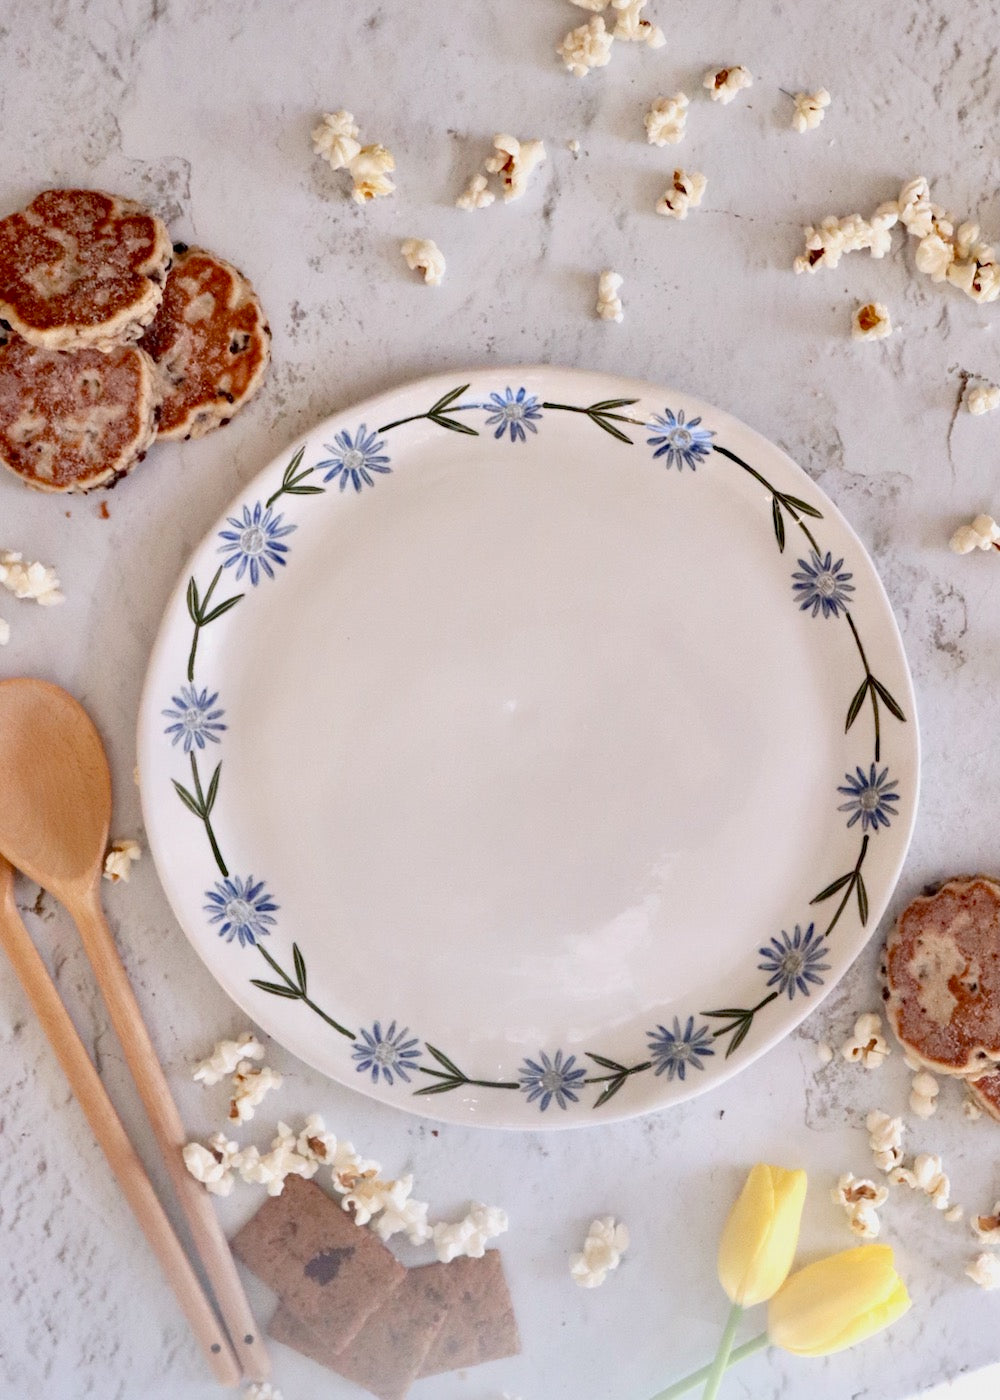 NEW: Large Round Serving Platter - White with Blue Daisy